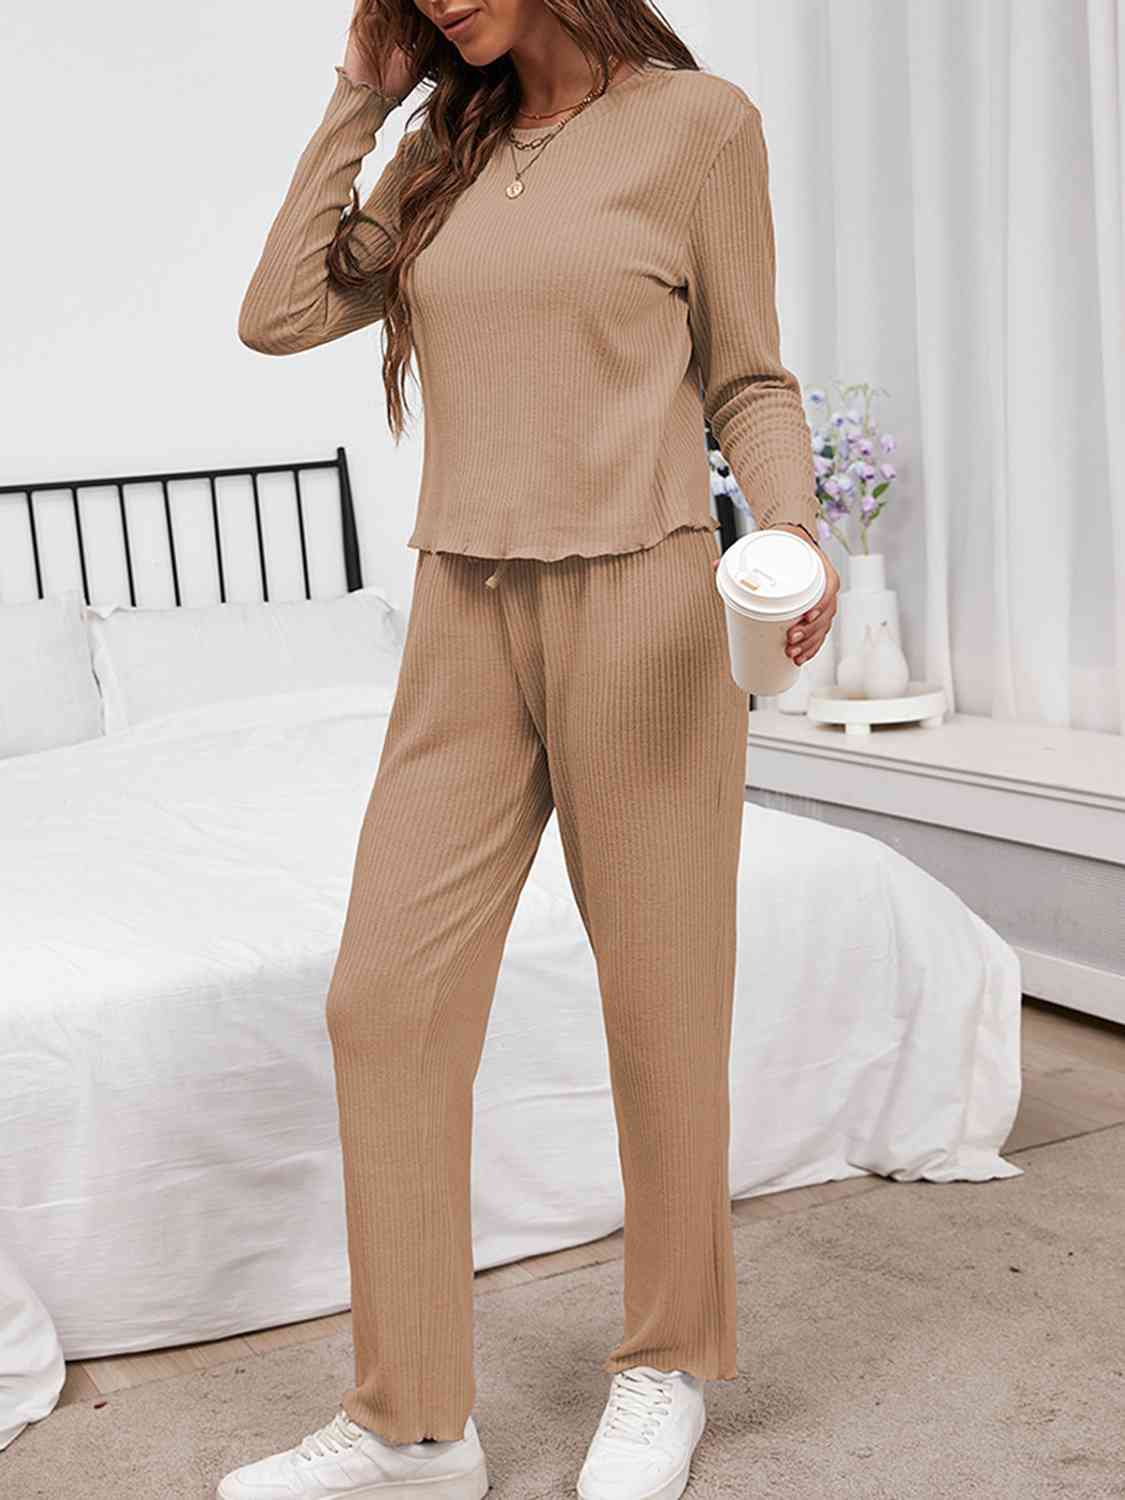 Round Neck Long Sleeve Top and Drawstring Pants Lounge Set (3 Colors)  Krazy Heart Designs Boutique   